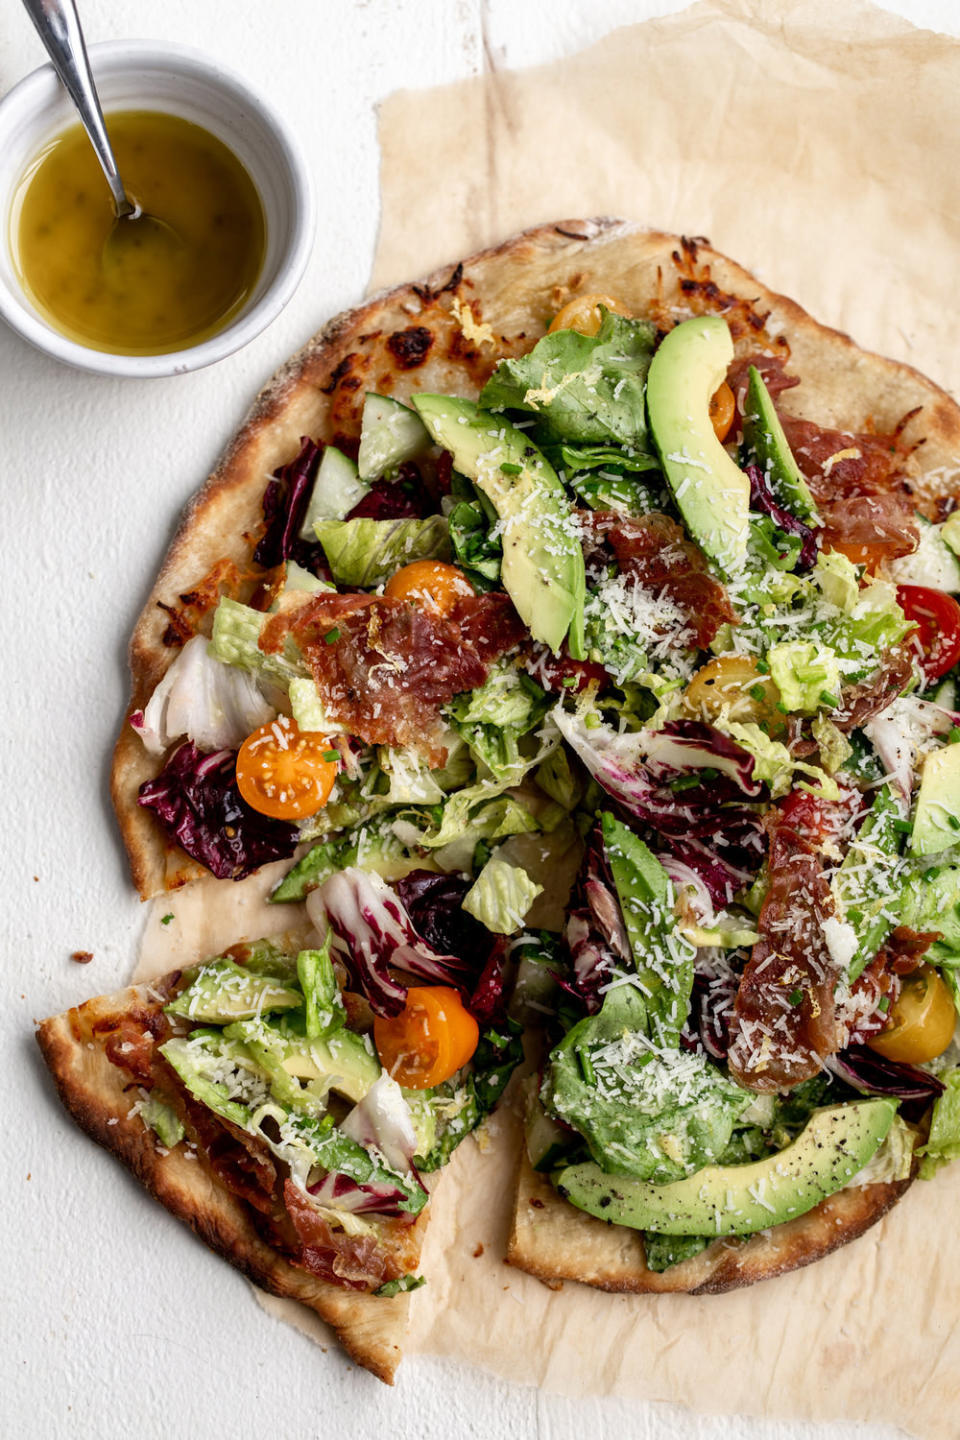 A pizza topped with lettuce, tomato, avocado, and proscuitto.